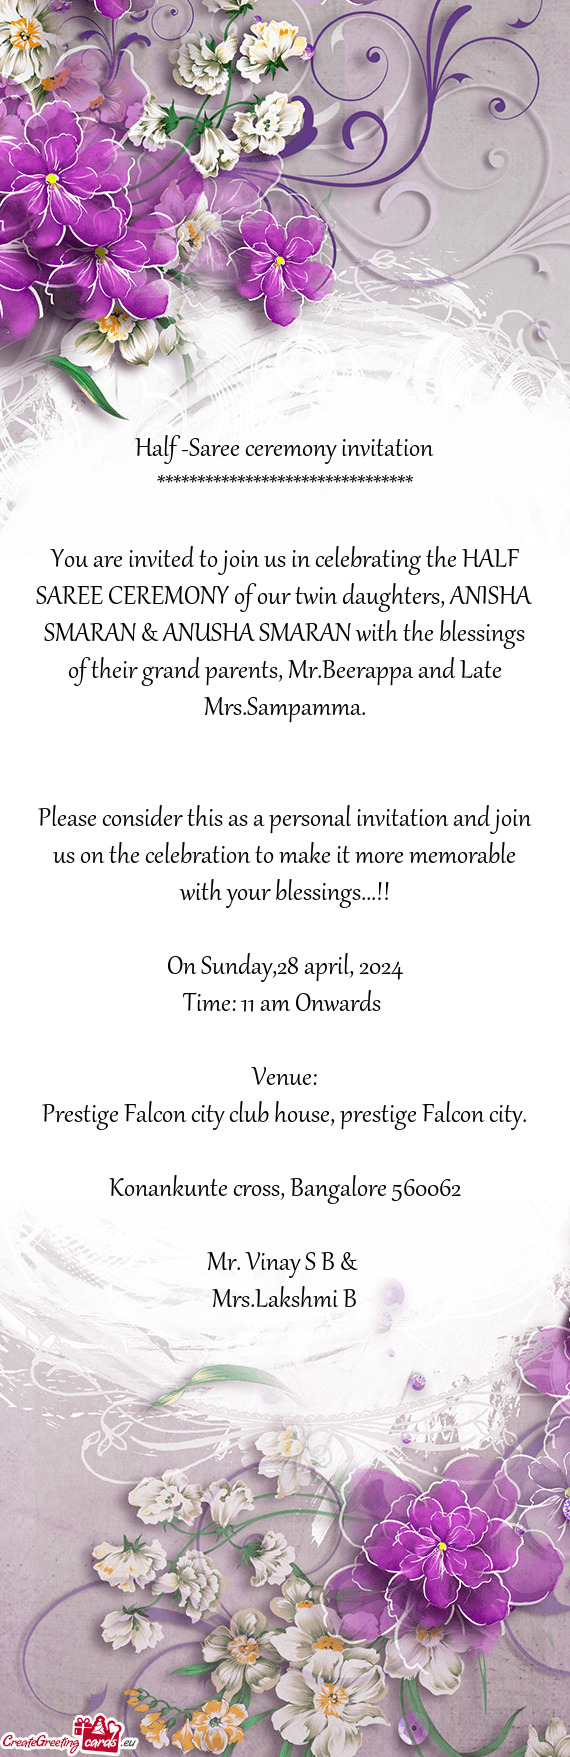 You are invited to join us in celebrating the HALF SAREE CEREMONY of our twin daughters, ANISHA SMAR